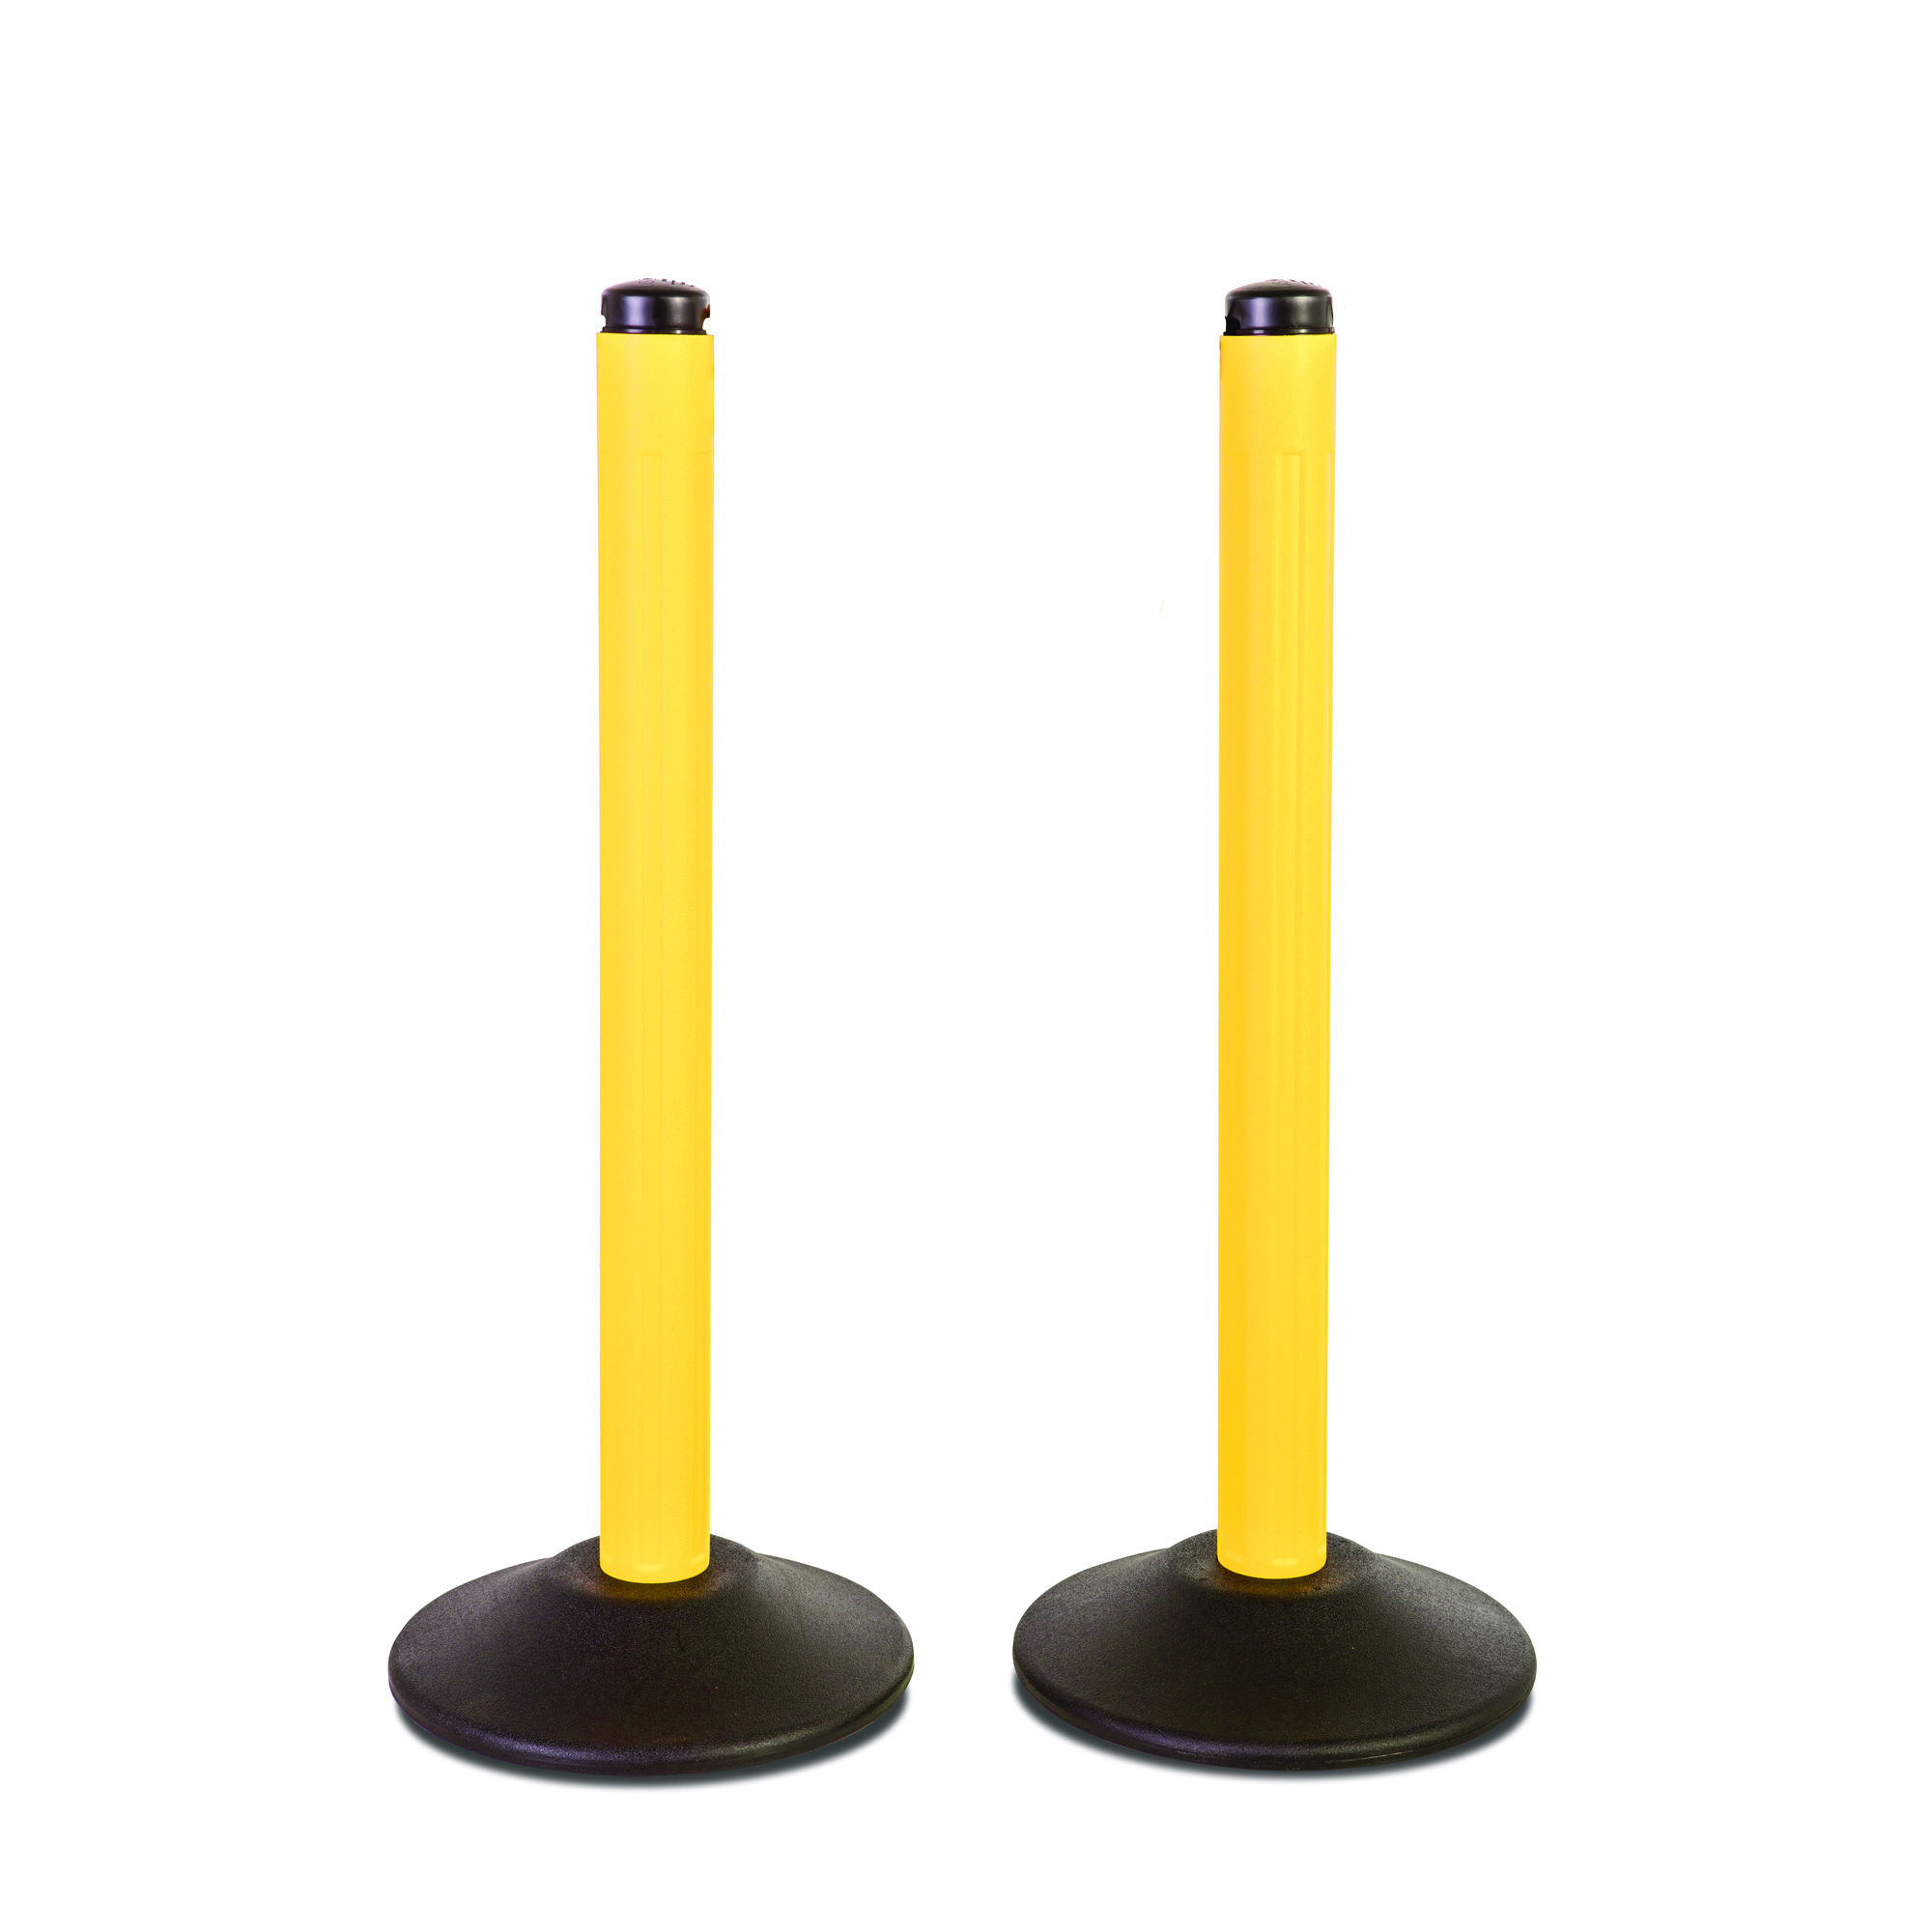 US Weight, Yellow post, no chain - unweighted base - 2 pack, Model U2004NC